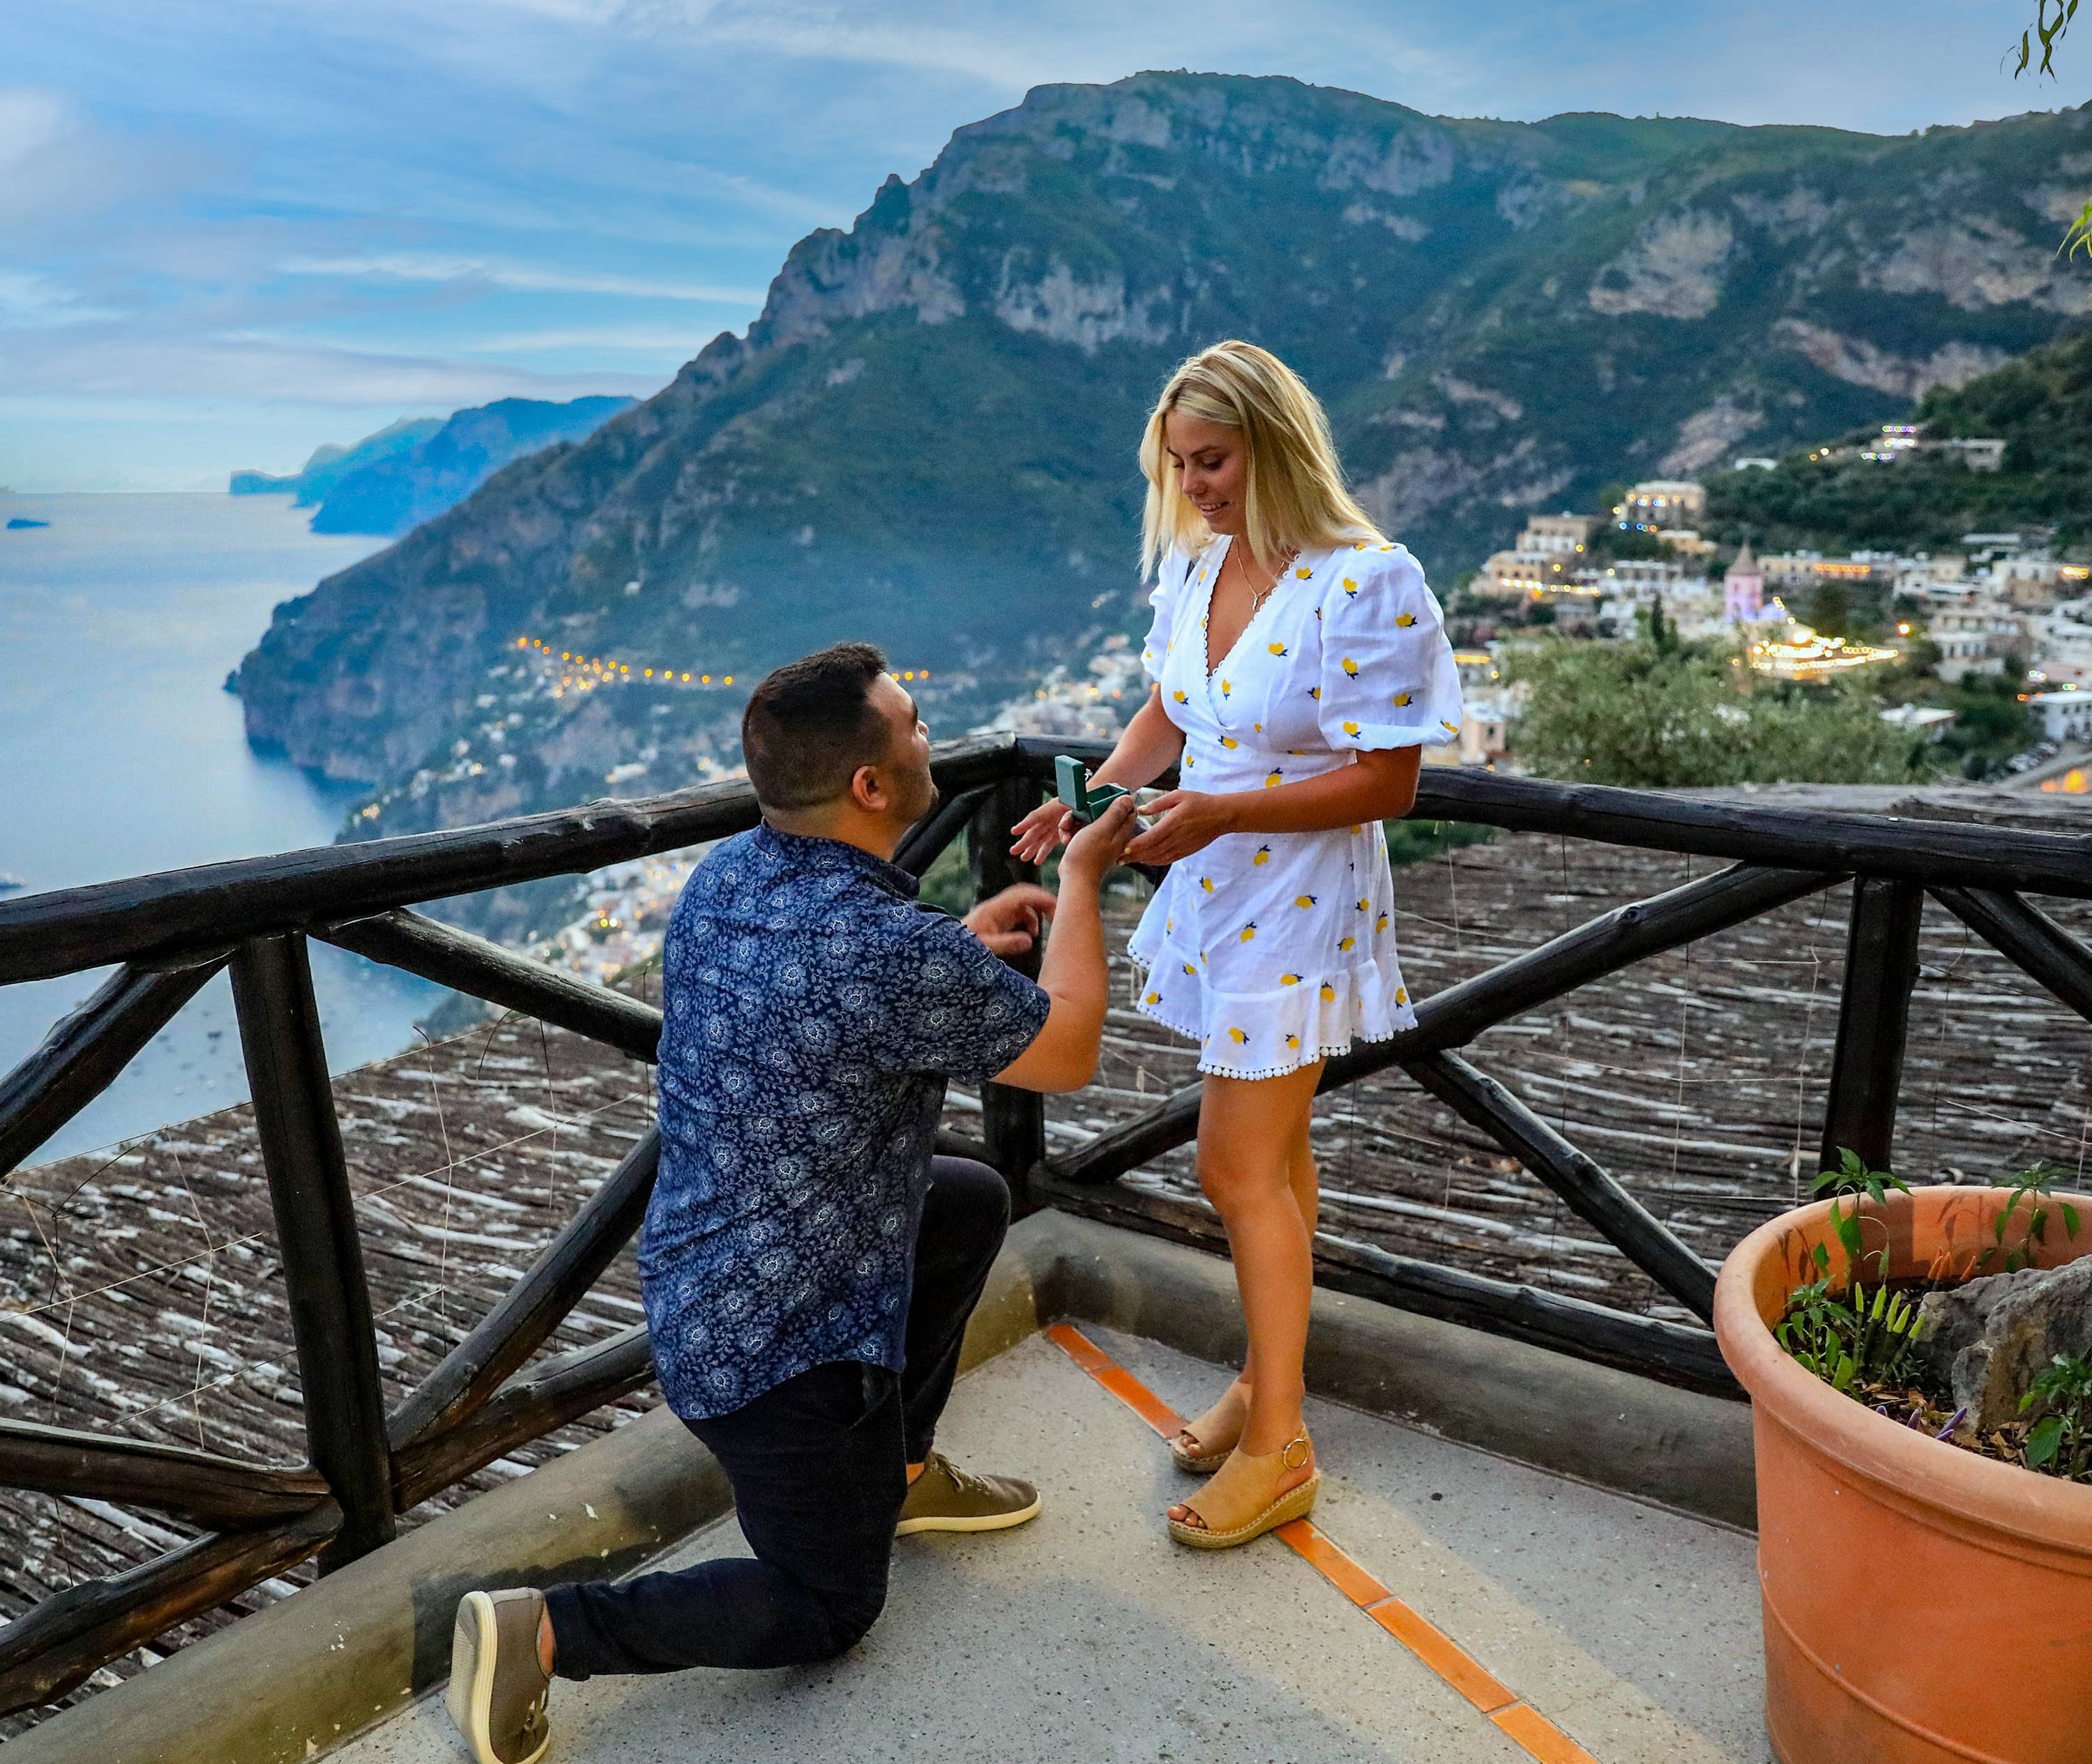 Anthony kneeling proposing to Abigail in Italy